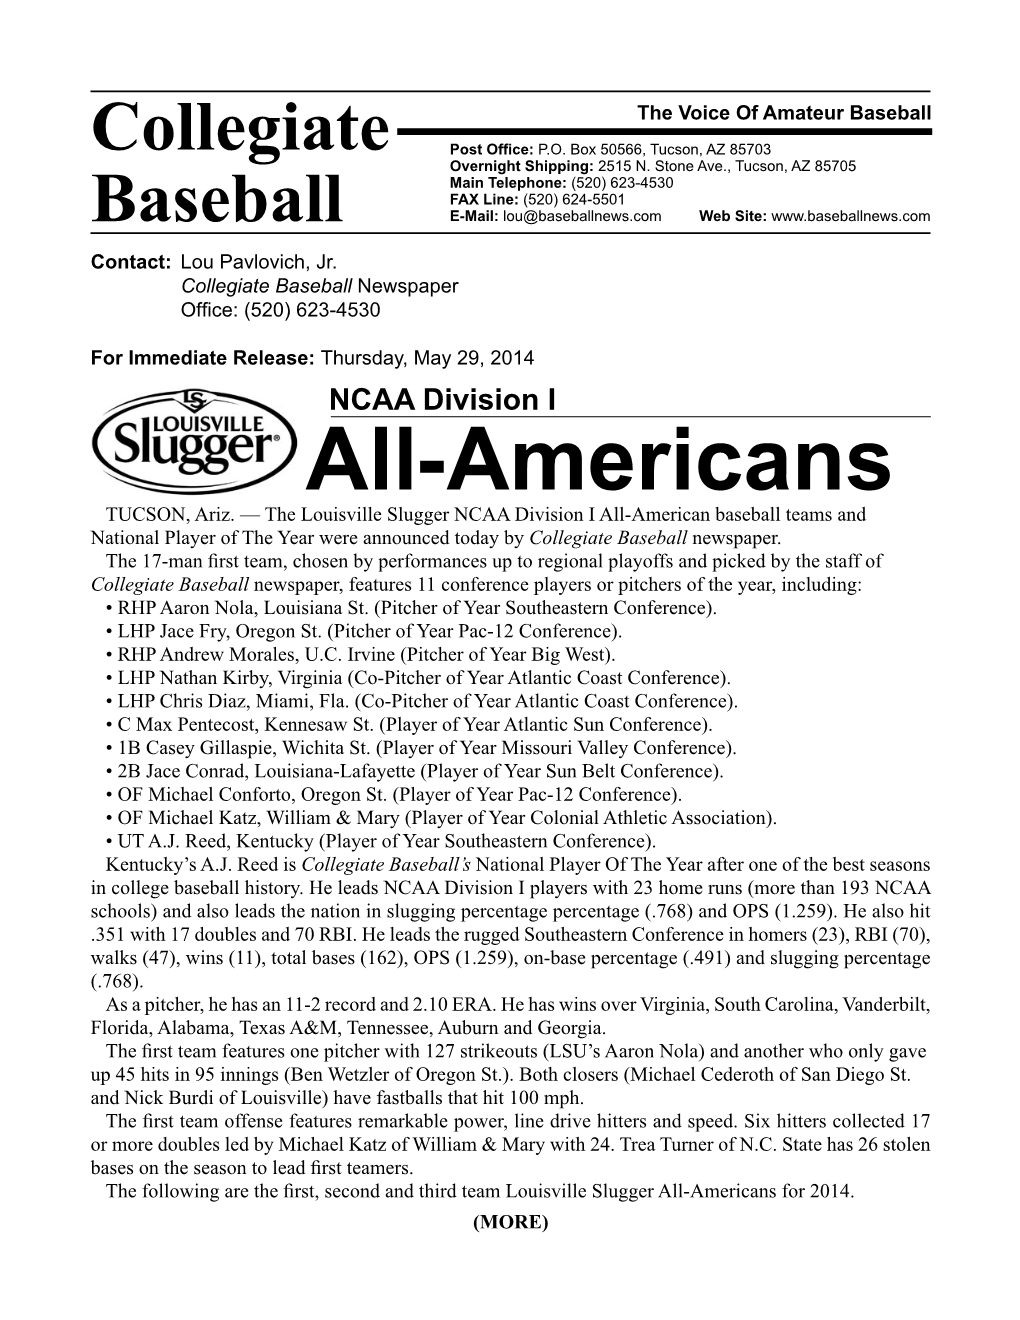 2014 All-American Release Spring 5-29-14.Indd